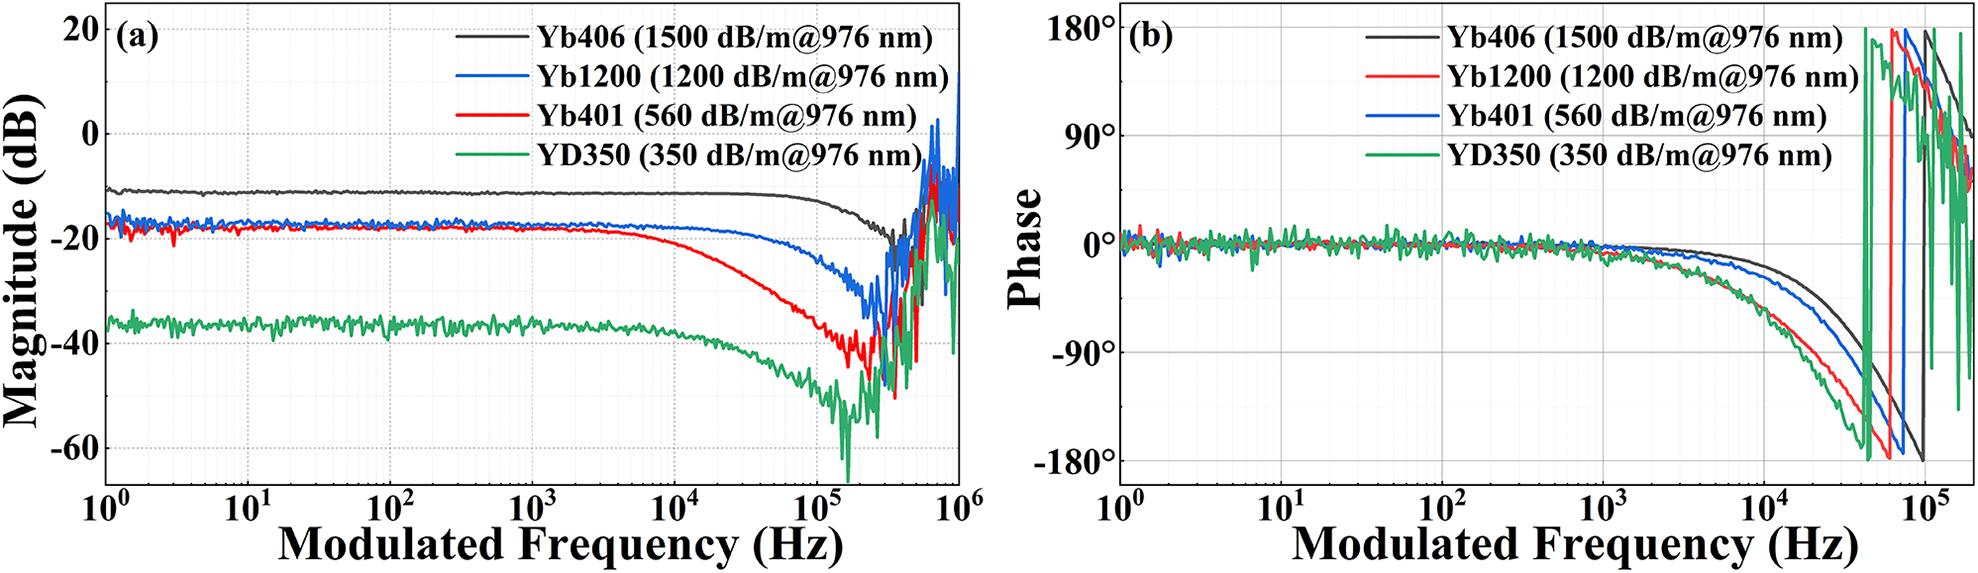 Experimentally measured transfer function (a) amplitude and (b) phase of NPR mode-locked Yb-doped fiber laser using different types of Yb-doped fibers and the same dispersion condition. The four lines represent four different types of fibers.